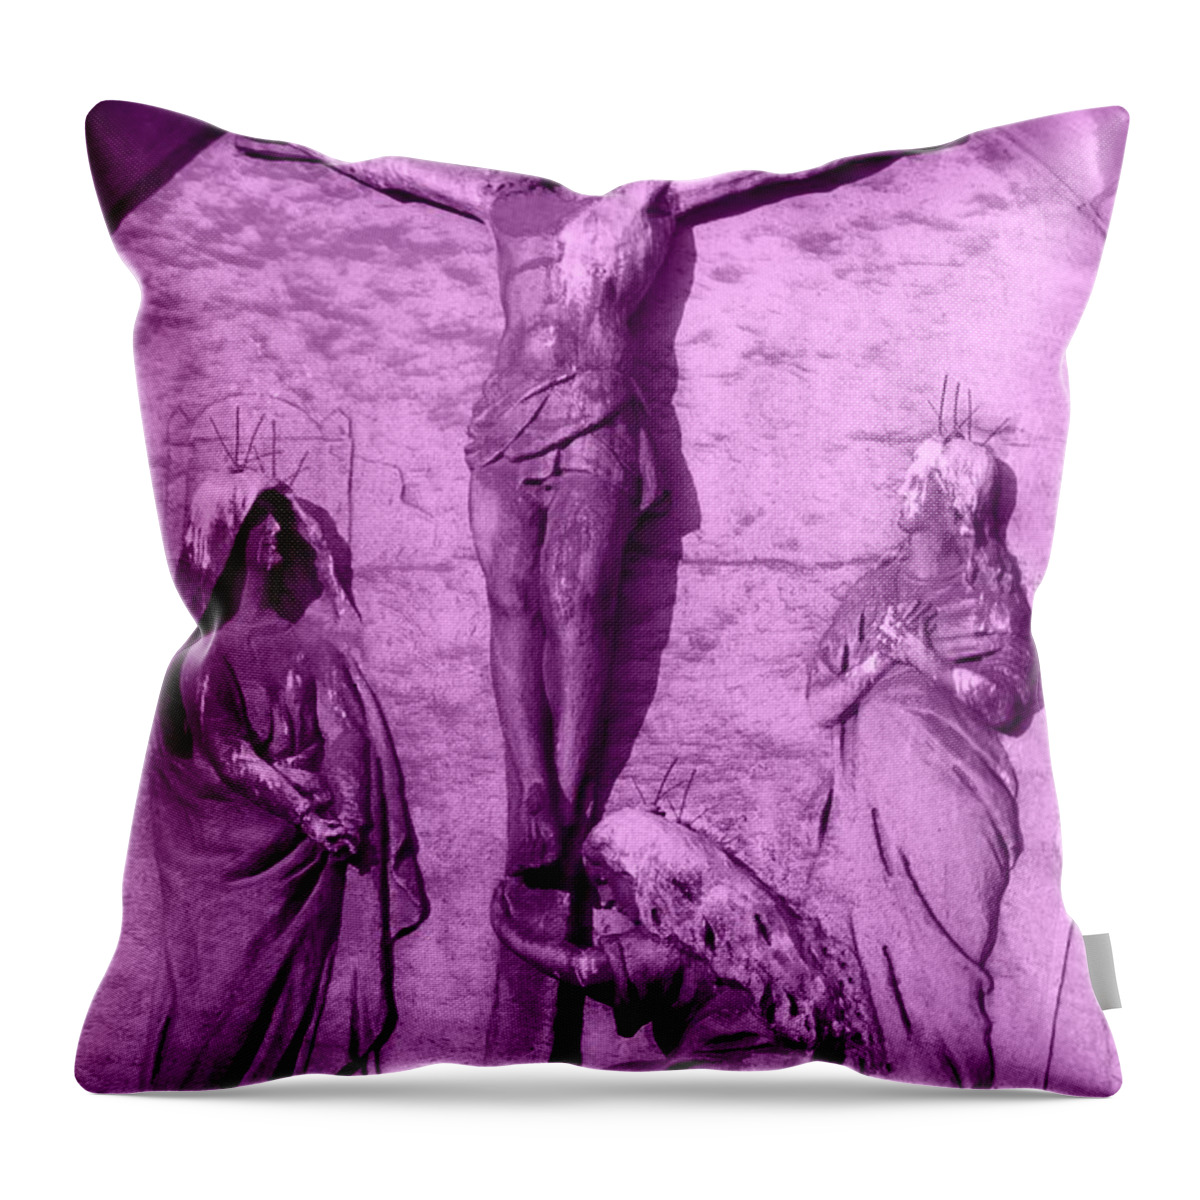 Crossed Throw Pillow featuring the photograph Crossed #1 by Edward Smith